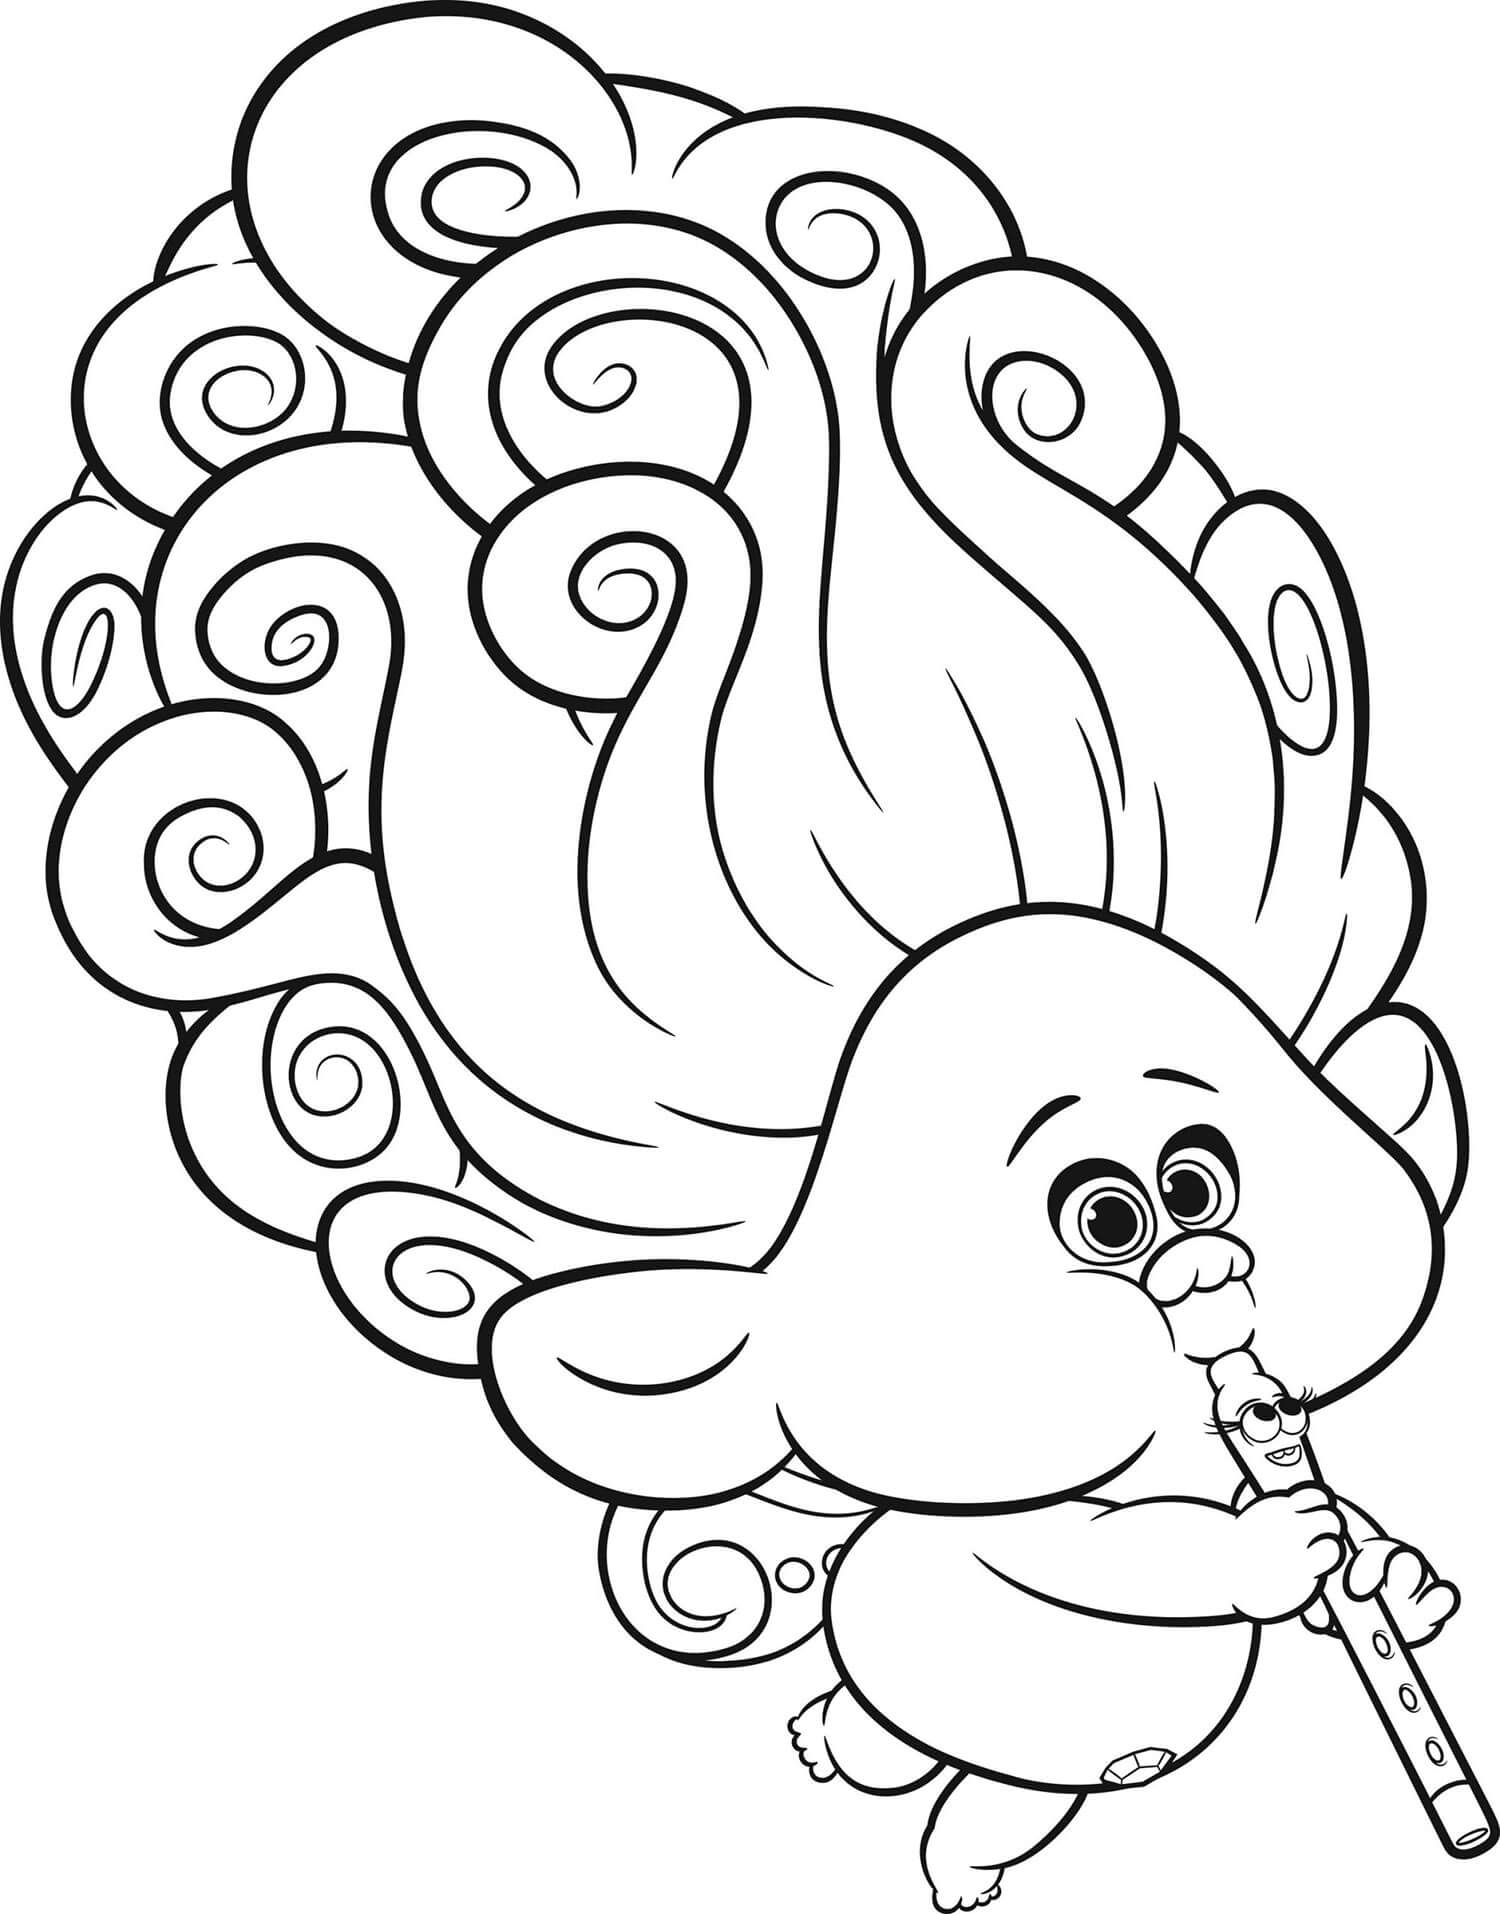 HQ Trolls Image Coloring Page